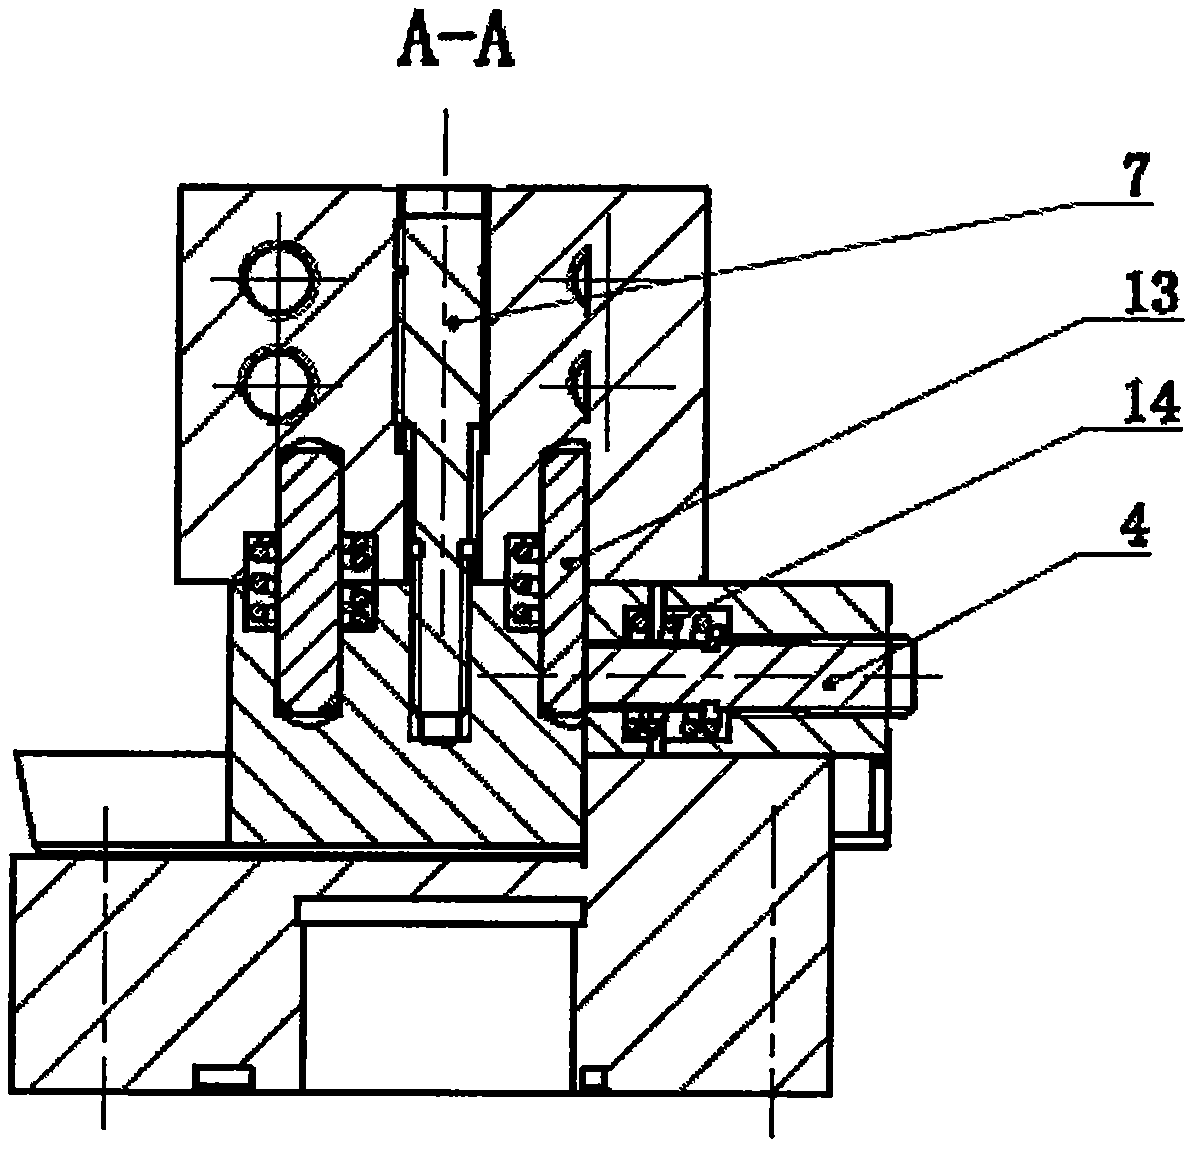 A blade clamping and centering adjustment device for an indexable blade peripheral grinder